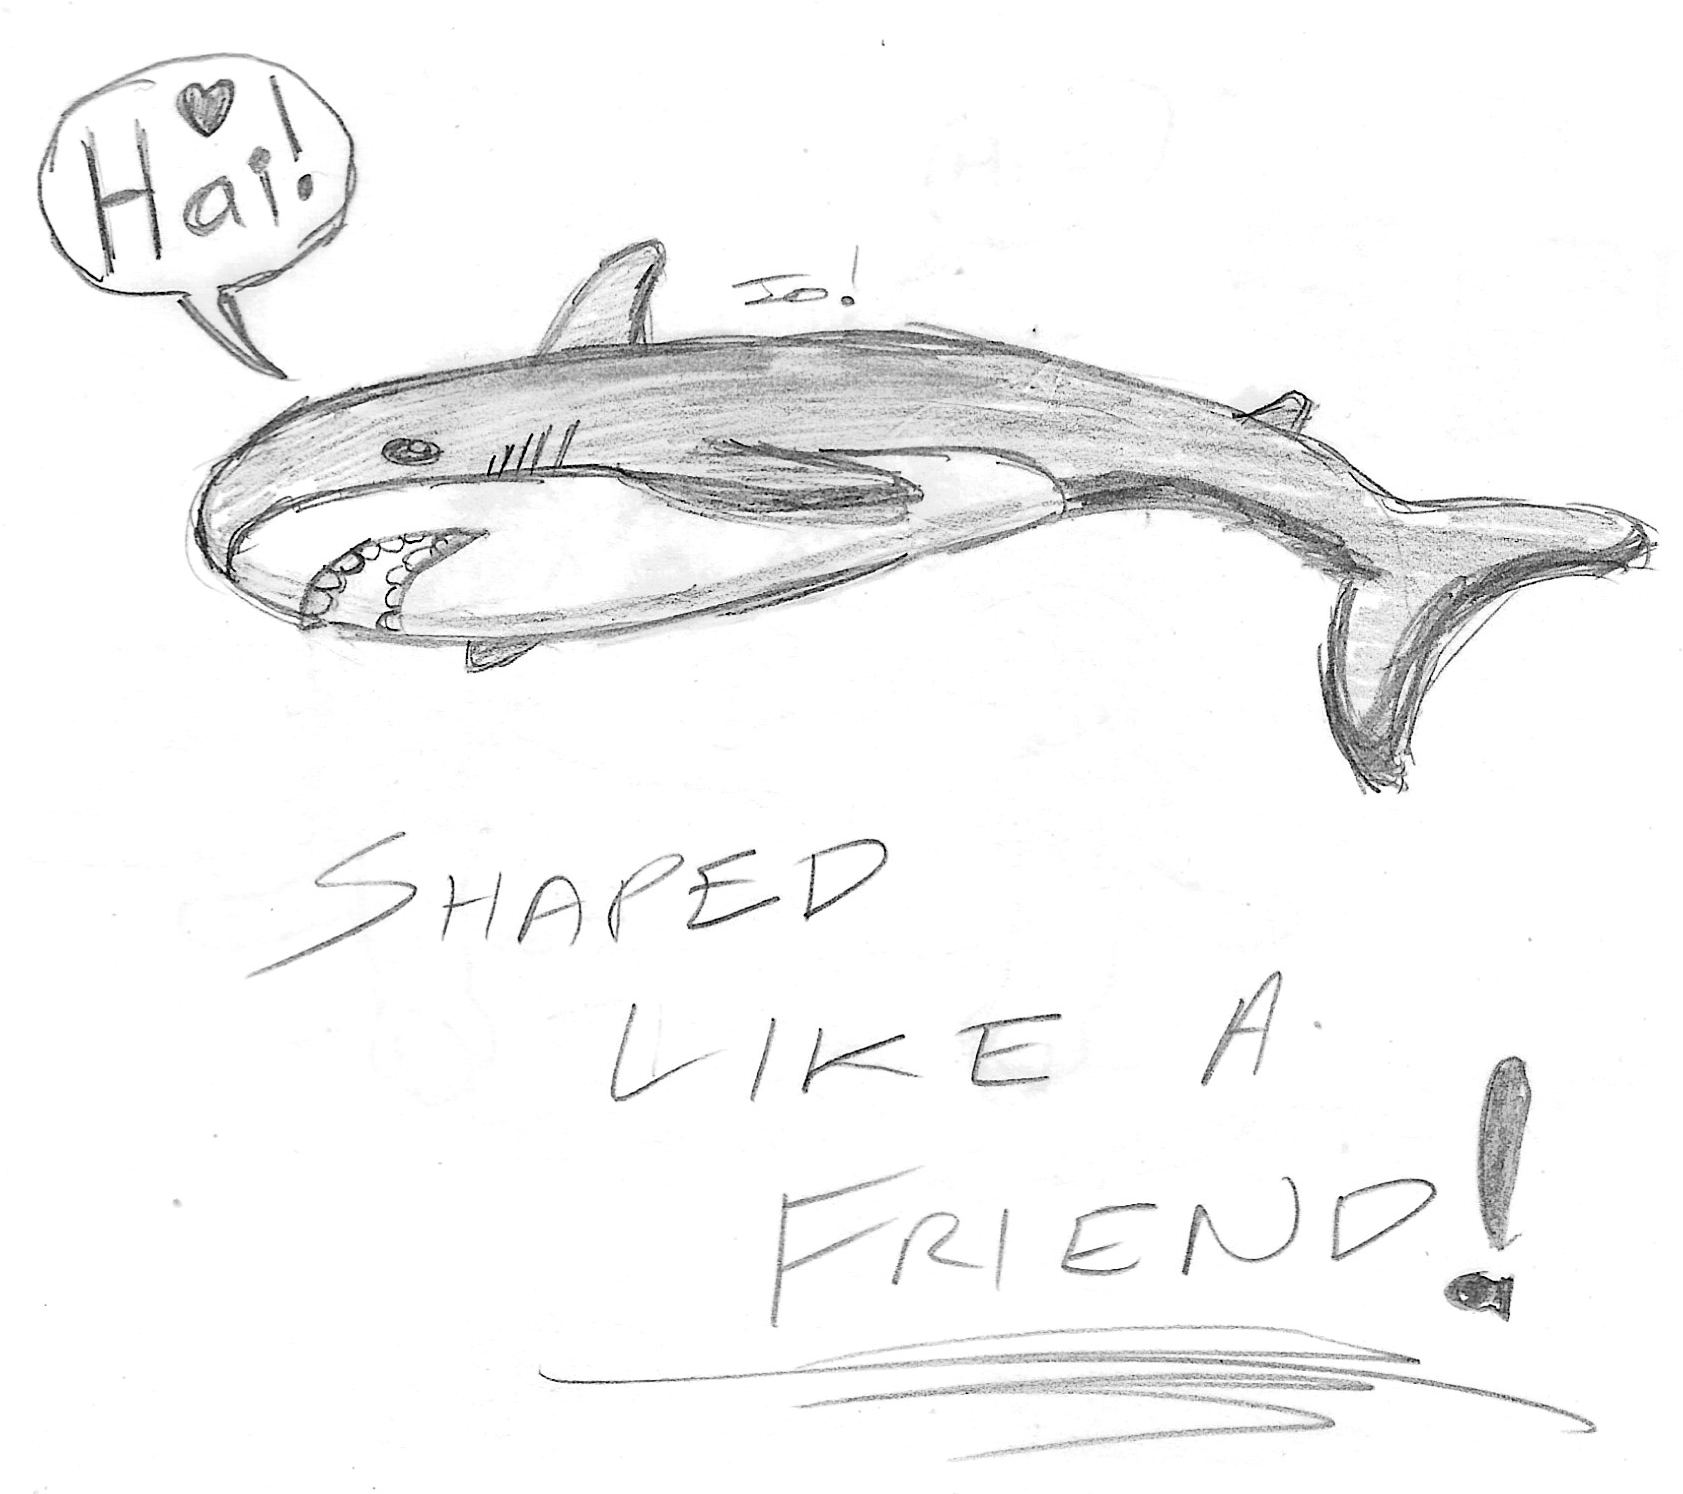 Sketch of a plush shark swimming by, saying "Hai!" Below, the text reads "SHAPED LIKE A FRIEND!"